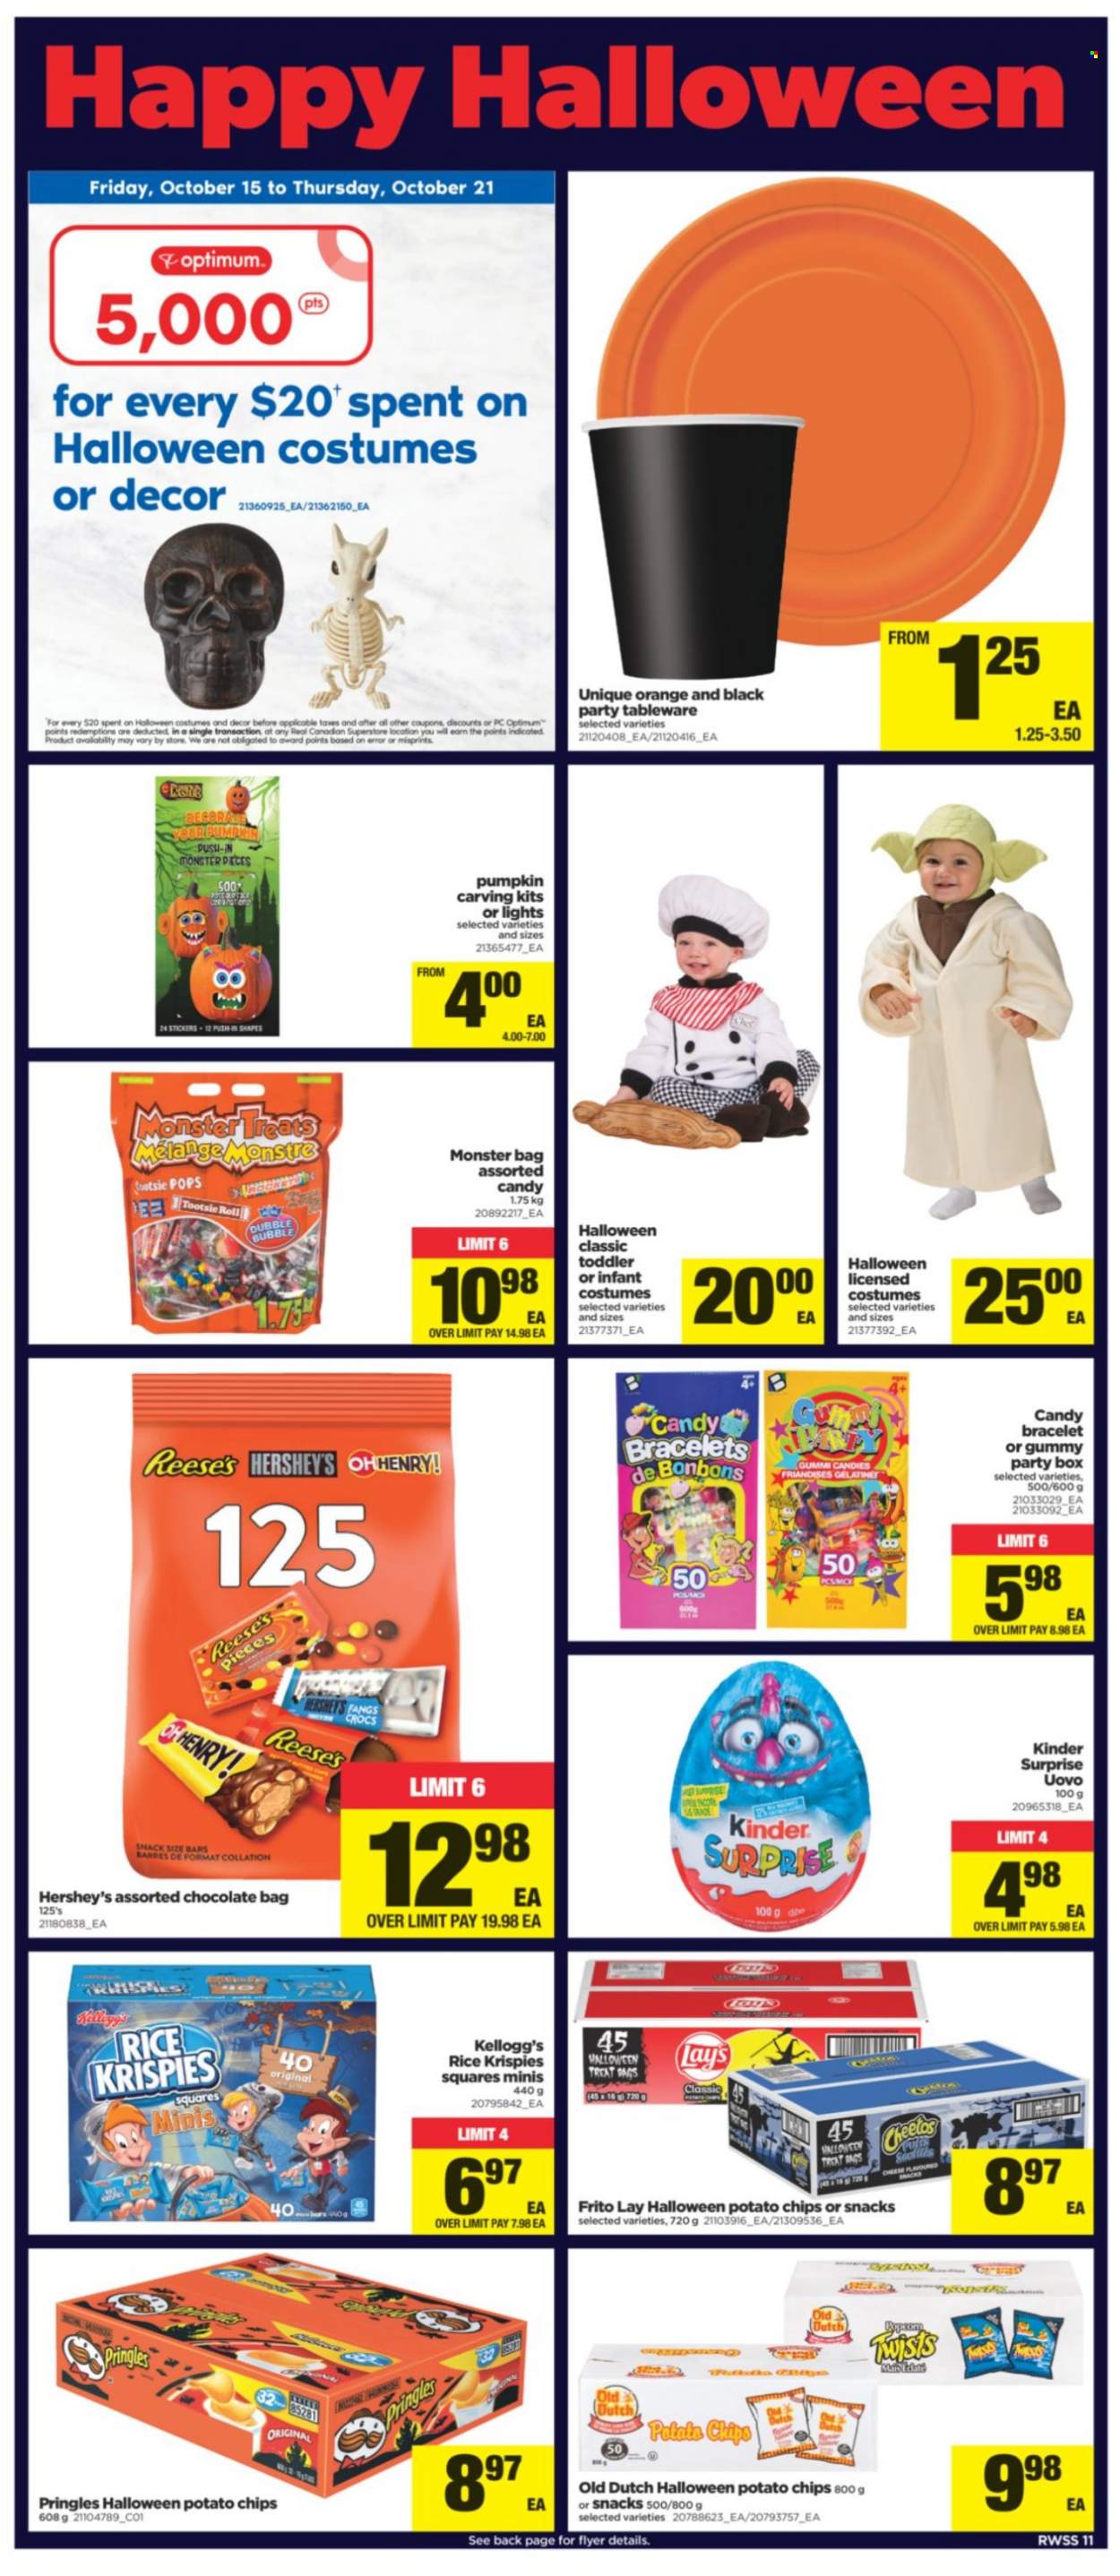 thumbnail - Real Canadian Superstore Flyer - October 15, 2021 - October 21, 2021 - Sales products - pumpkin, Reese's, Hershey's, chocolate, Kinder Surprise, Kellogg's, potato chips, Pringles, Lay’s, Rice Krispies, Monster, bag, tableware, Optimum, Halloween, costume, sticker, chips, oranges. Page 11.